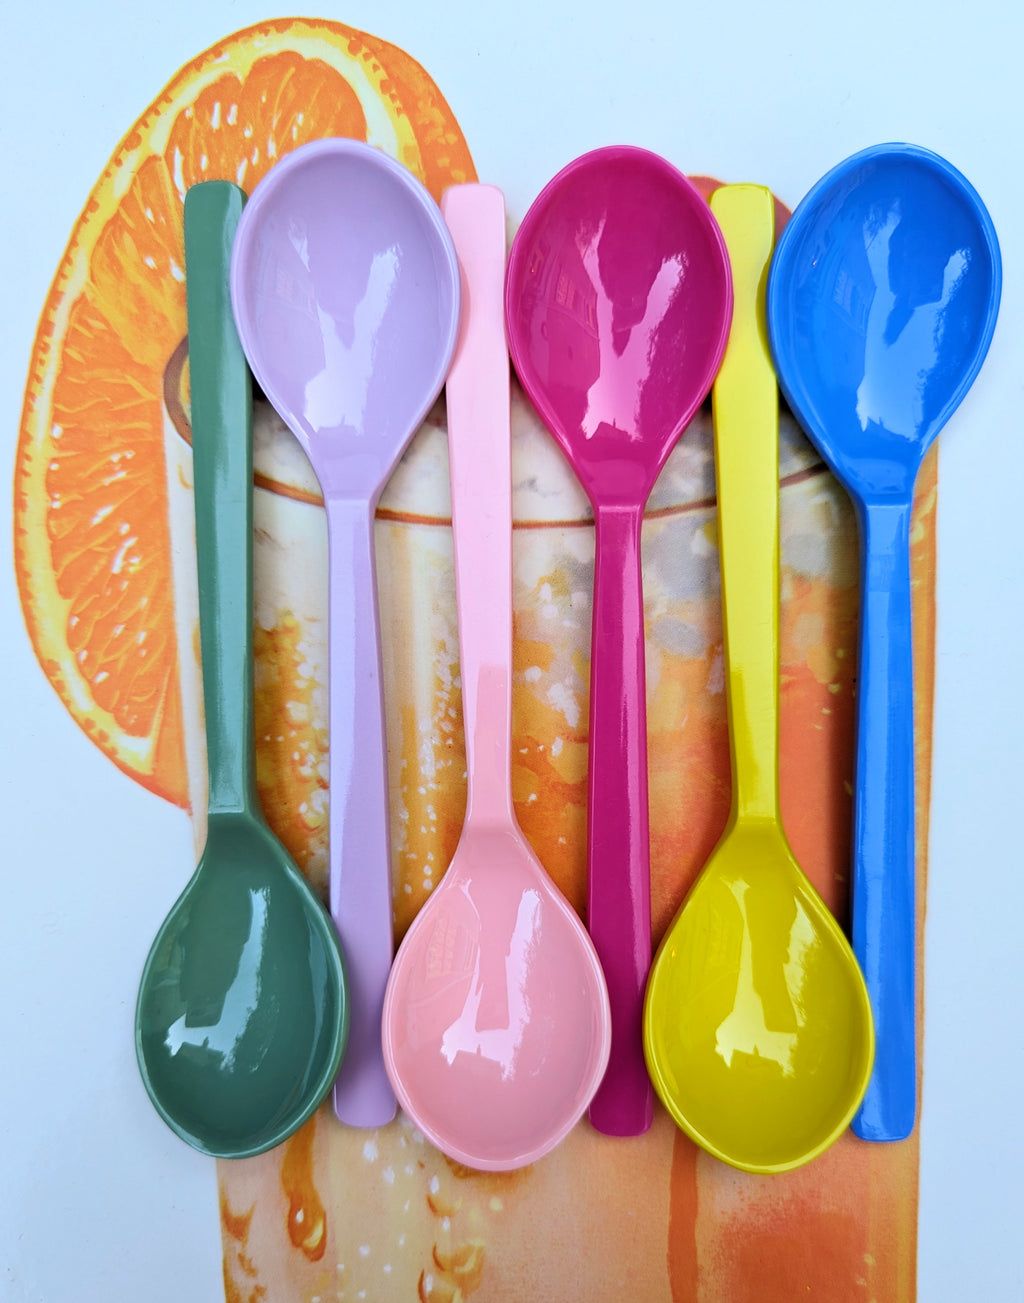 Spoons set of 6